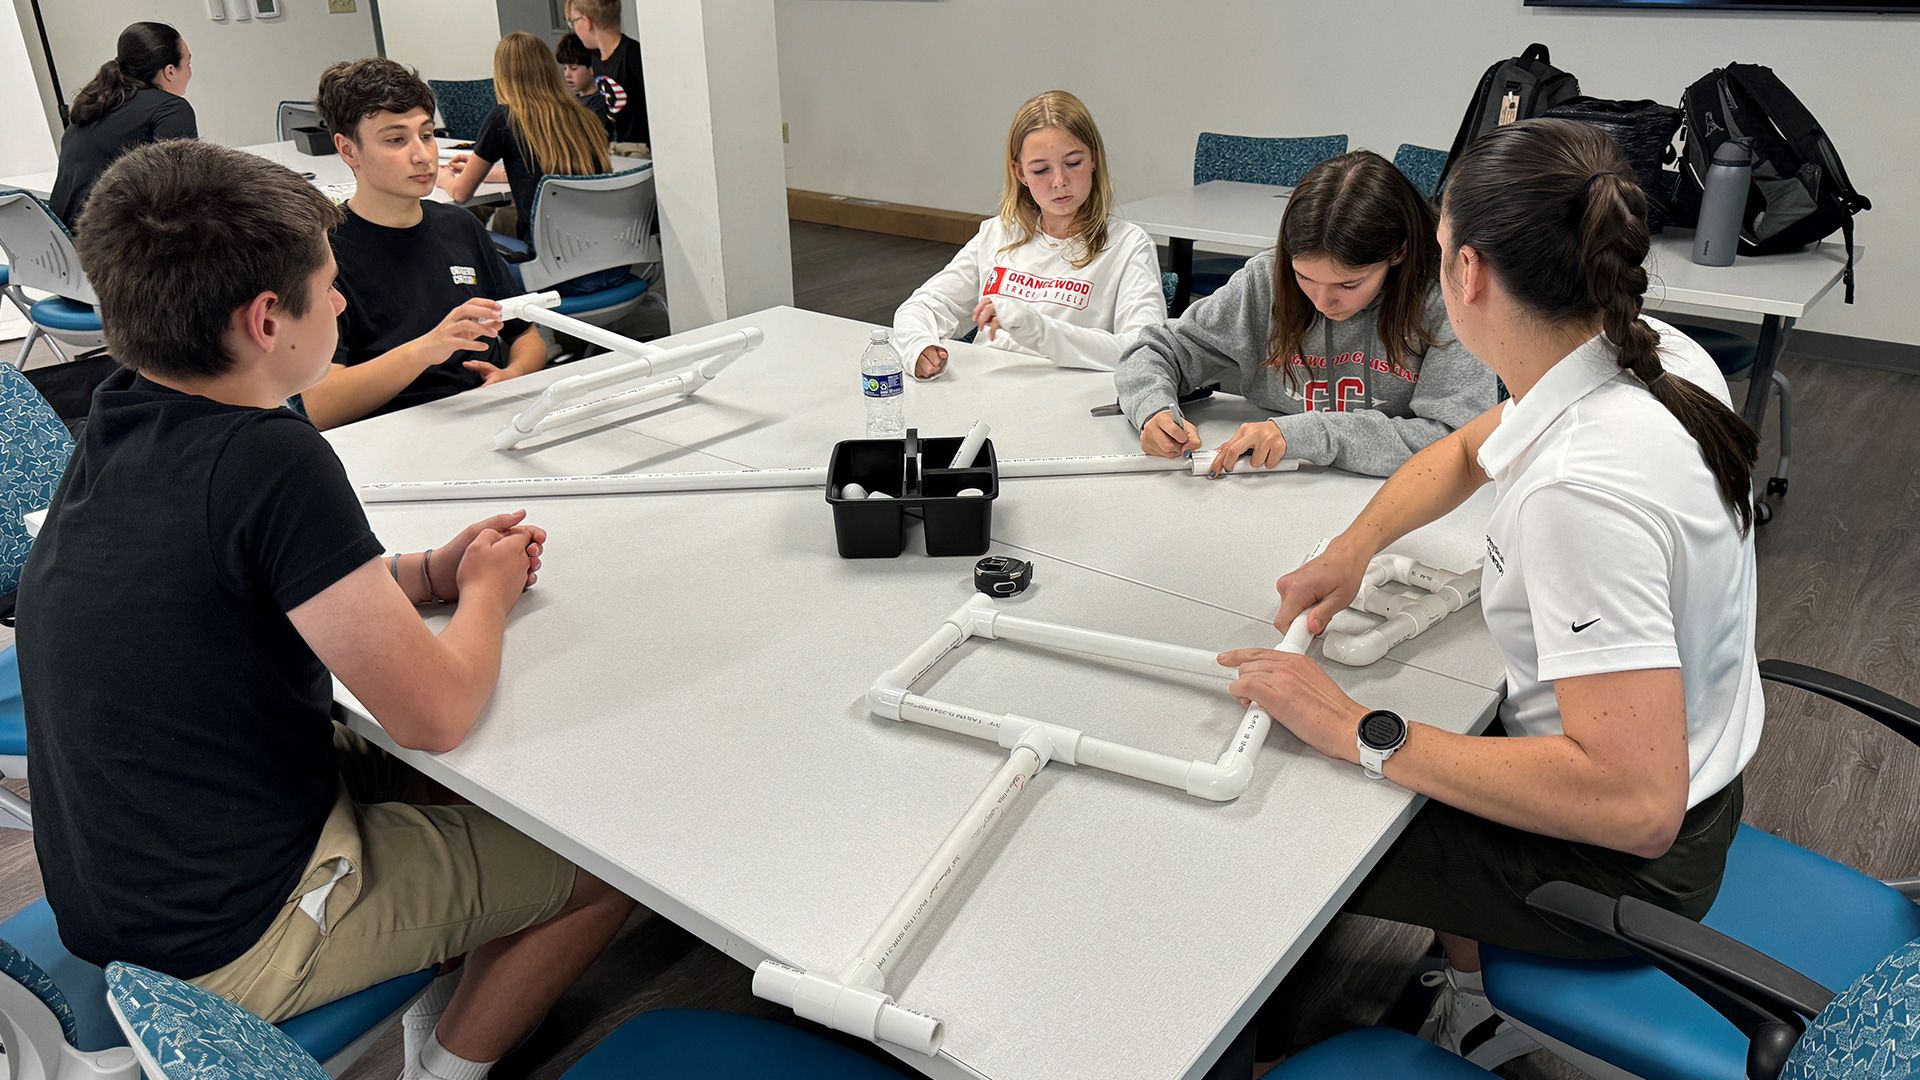 Students sat around a table creating prototypes of an assistive ipad holder